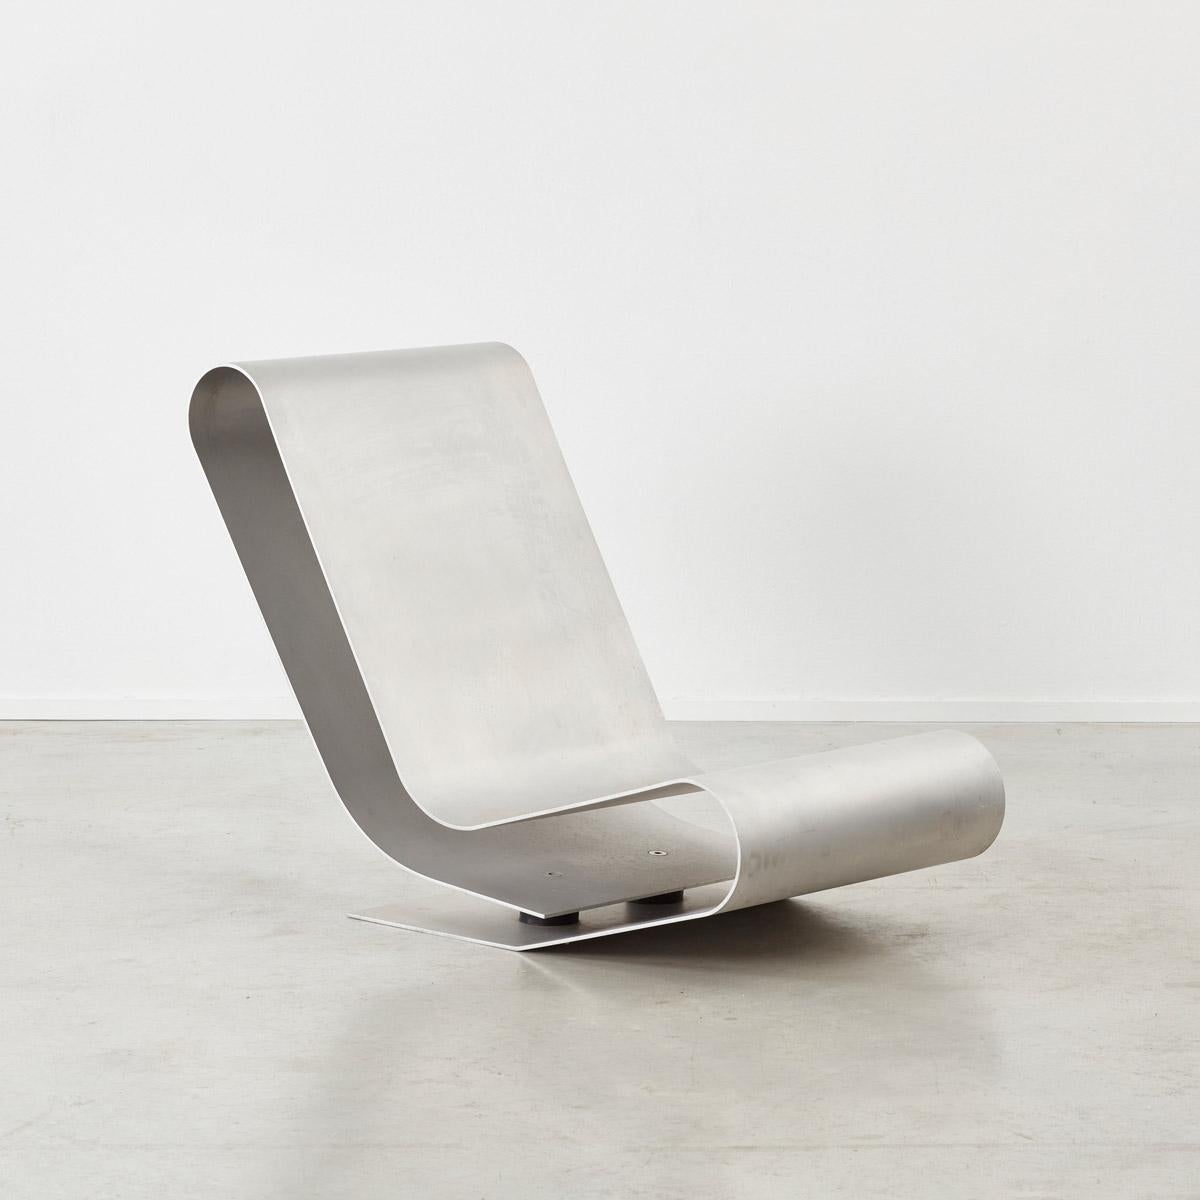 From his beginnings as an architect, Maarten van Severen is interested in investigating questions of shape, material and construction. The unified process of design and production is noticeable in his MVS LC95 low chair. Making aluminum his